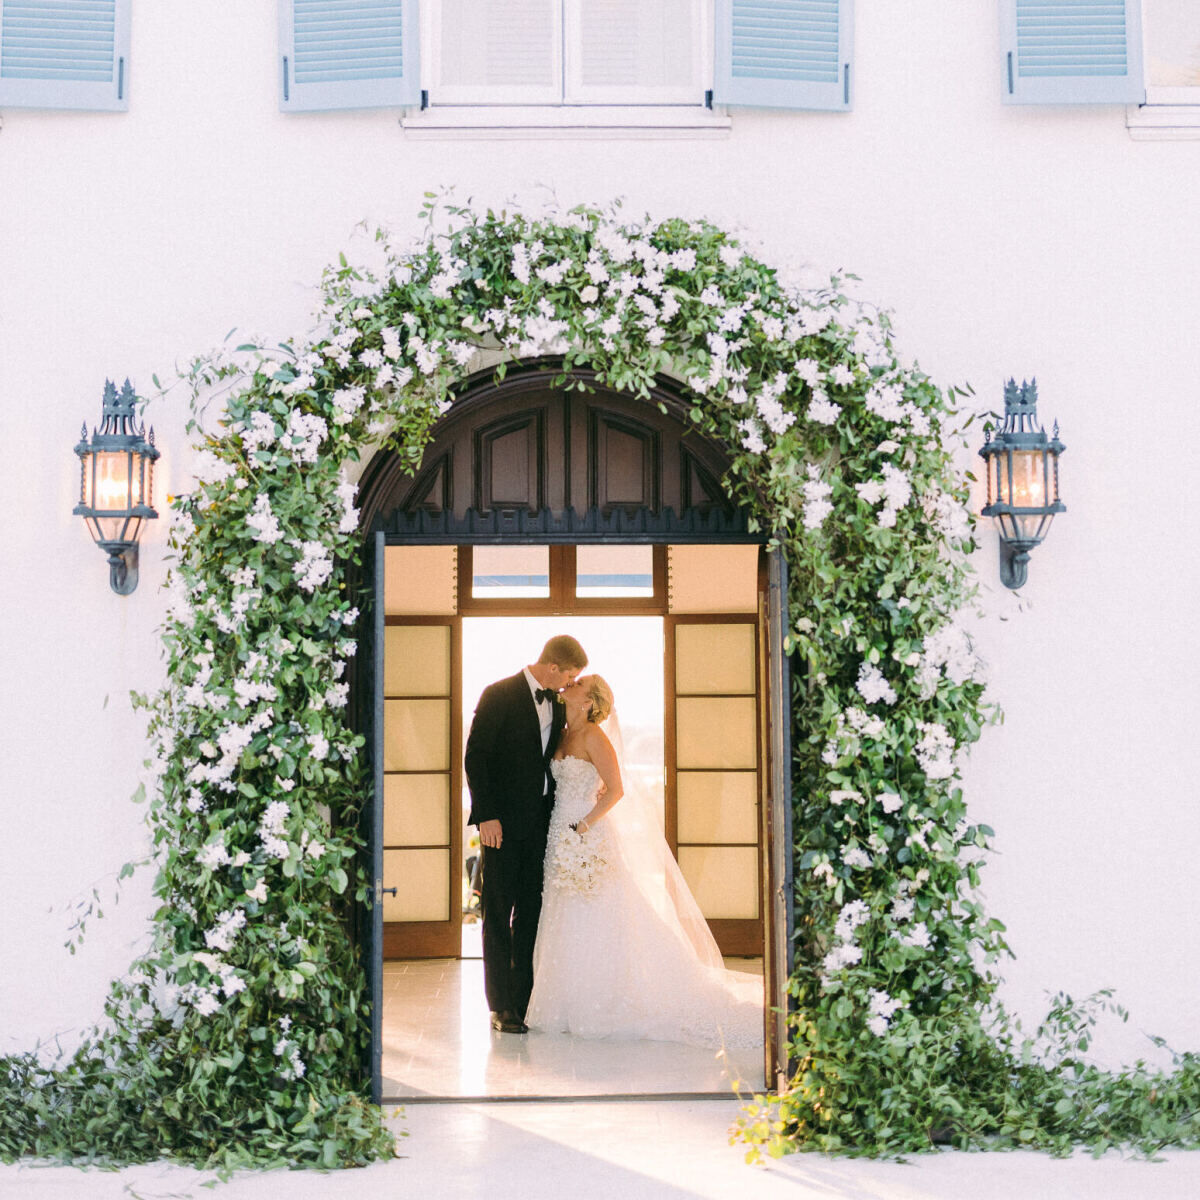 A bride and groom share a kiss inside the house where their at-home wedding took place, whose doorway was decorated with white flowers and greenery for the occasion.